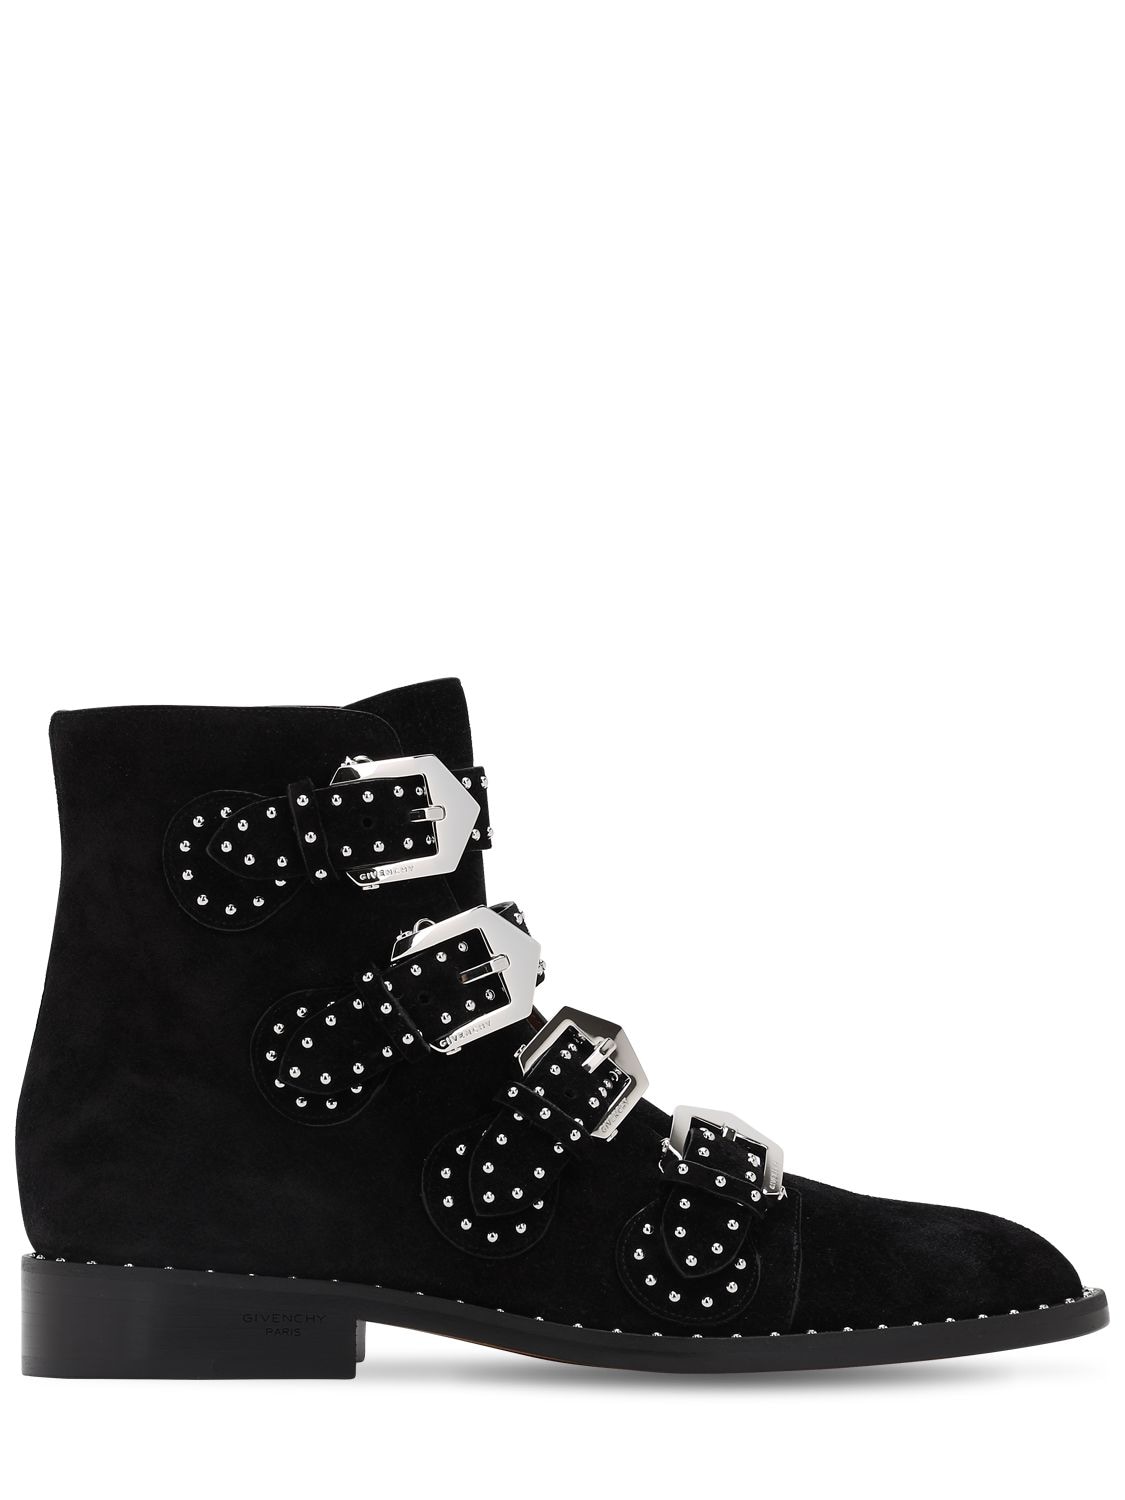 GIVENCHY 20MM STUDDED SUEDE ANKLE BOOTS,70IA8M010-MDAX0